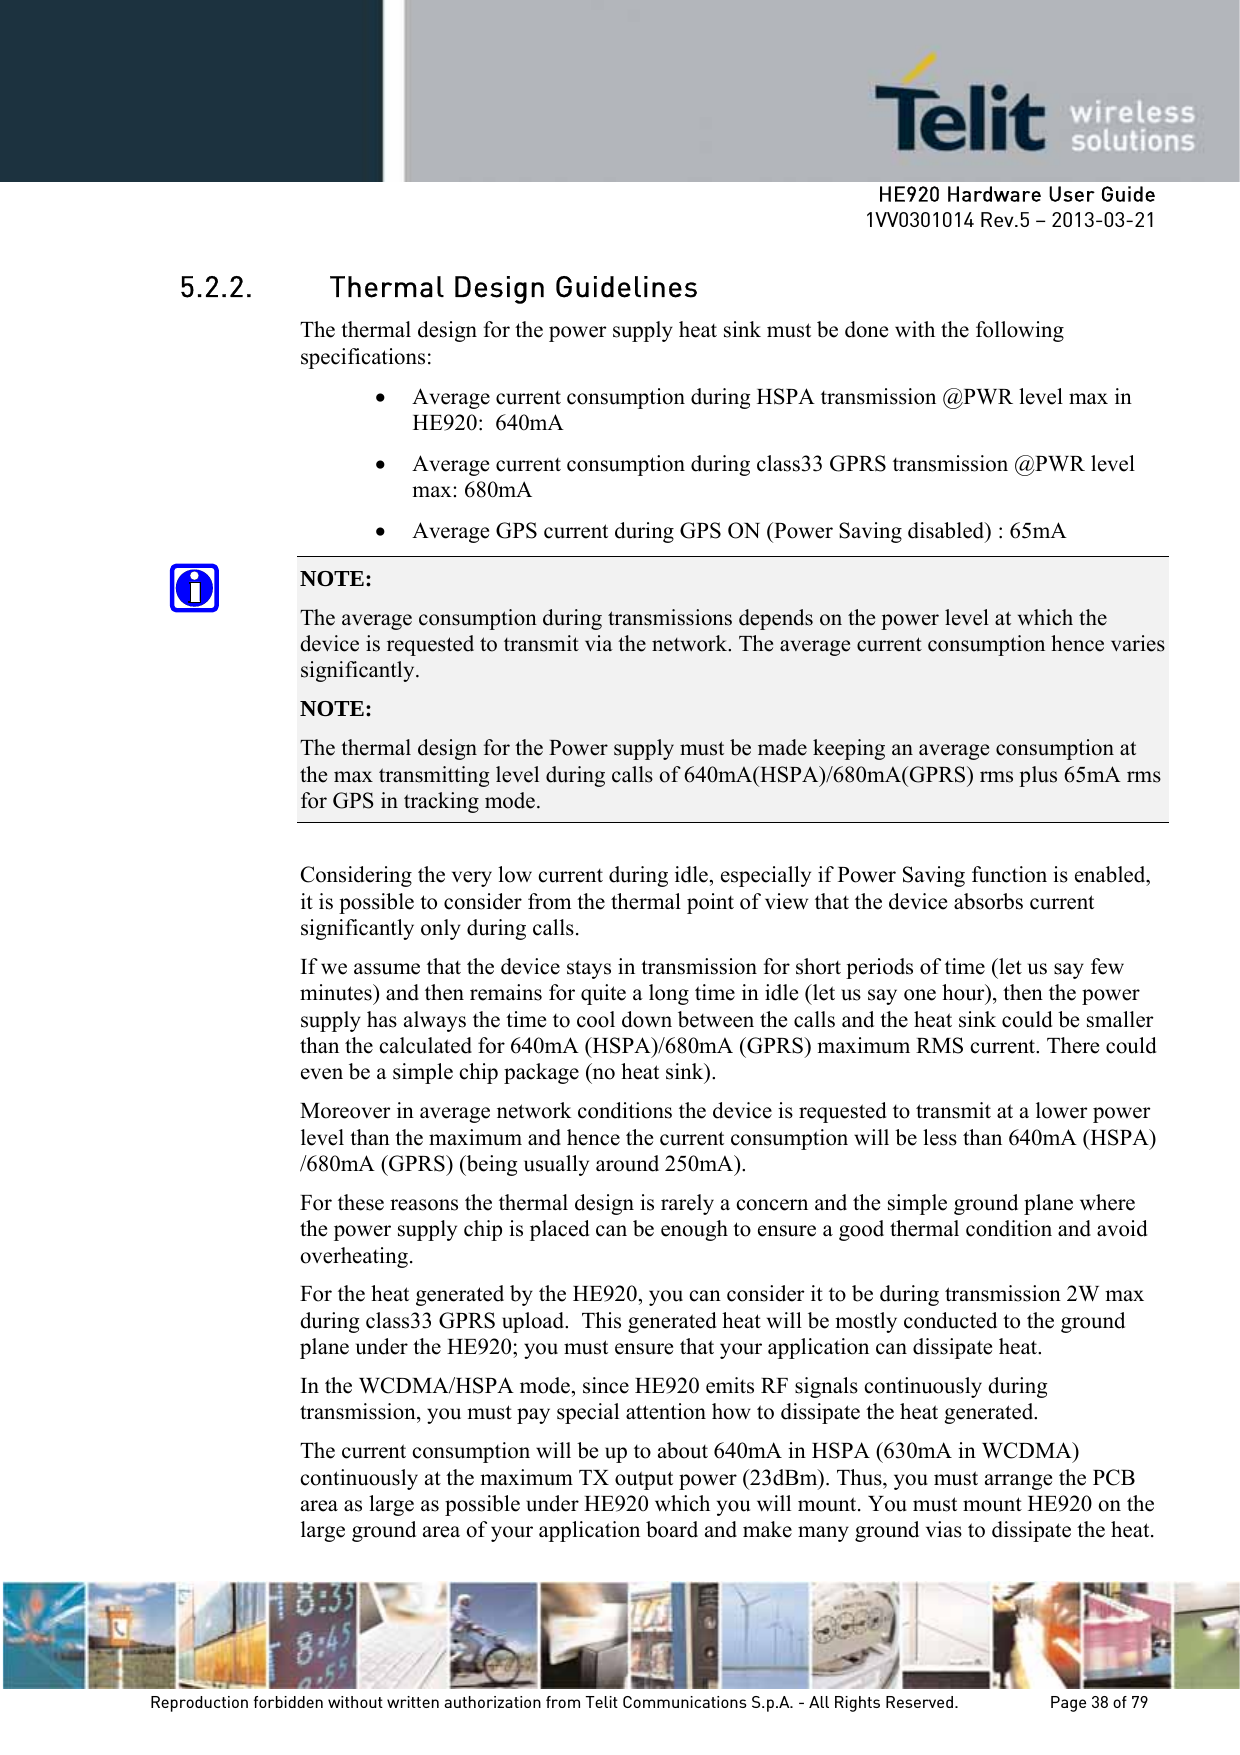     HE920 Hardware User Guide 1VV0301014 Rev.5 – 2013-03-21 Reproduction forbidden without written authorization from Telit Communications S.p.A. - All Rights Reserved.    Page 38 of 79  5.2.2. Thermal Design Guidelines The thermal design for the power supply heat sink must be done with the following specifications: • Average current consumption during HSPA transmission @PWR level max in HE920:  640mA • Average current consumption during class33 GPRS transmission @PWR level max: 680mA  • Average GPS current during GPS ON (Power Saving disabled) : 65mA NOTE:  The average consumption during transmissions depends on the power level at which the device is requested to transmit via the network. The average current consumption hence varies significantly. NOTE:  The thermal design for the Power supply must be made keeping an average consumption at the max transmitting level during calls of 640mA(HSPA)/680mA(GPRS) rms plus 65mA rms for GPS in tracking mode.  Considering the very low current during idle, especially if Power Saving function is enabled, it is possible to consider from the thermal point of view that the device absorbs current significantly only during calls.  If we assume that the device stays in transmission for short periods of time (let us say few minutes) and then remains for quite a long time in idle (let us say one hour), then the power supply has always the time to cool down between the calls and the heat sink could be smaller than the calculated for 640mA (HSPA)/680mA (GPRS) maximum RMS current. There could even be a simple chip package (no heat sink). Moreover in average network conditions the device is requested to transmit at a lower power level than the maximum and hence the current consumption will be less than 640mA (HSPA) /680mA (GPRS) (being usually around 250mA). For these reasons the thermal design is rarely a concern and the simple ground plane where the power supply chip is placed can be enough to ensure a good thermal condition and avoid overheating. For the heat generated by the HE920, you can consider it to be during transmission 2W max during class33 GPRS upload.  This generated heat will be mostly conducted to the ground plane under the HE920; you must ensure that your application can dissipate heat. In the WCDMA/HSPA mode, since HE920 emits RF signals continuously during transmission, you must pay special attention how to dissipate the heat generated. The current consumption will be up to about 640mA in HSPA (630mA in WCDMA) continuously at the maximum TX output power (23dBm). Thus, you must arrange the PCB area as large as possible under HE920 which you will mount. You must mount HE920 on the large ground area of your application board and make many ground vias to dissipate the heat. 